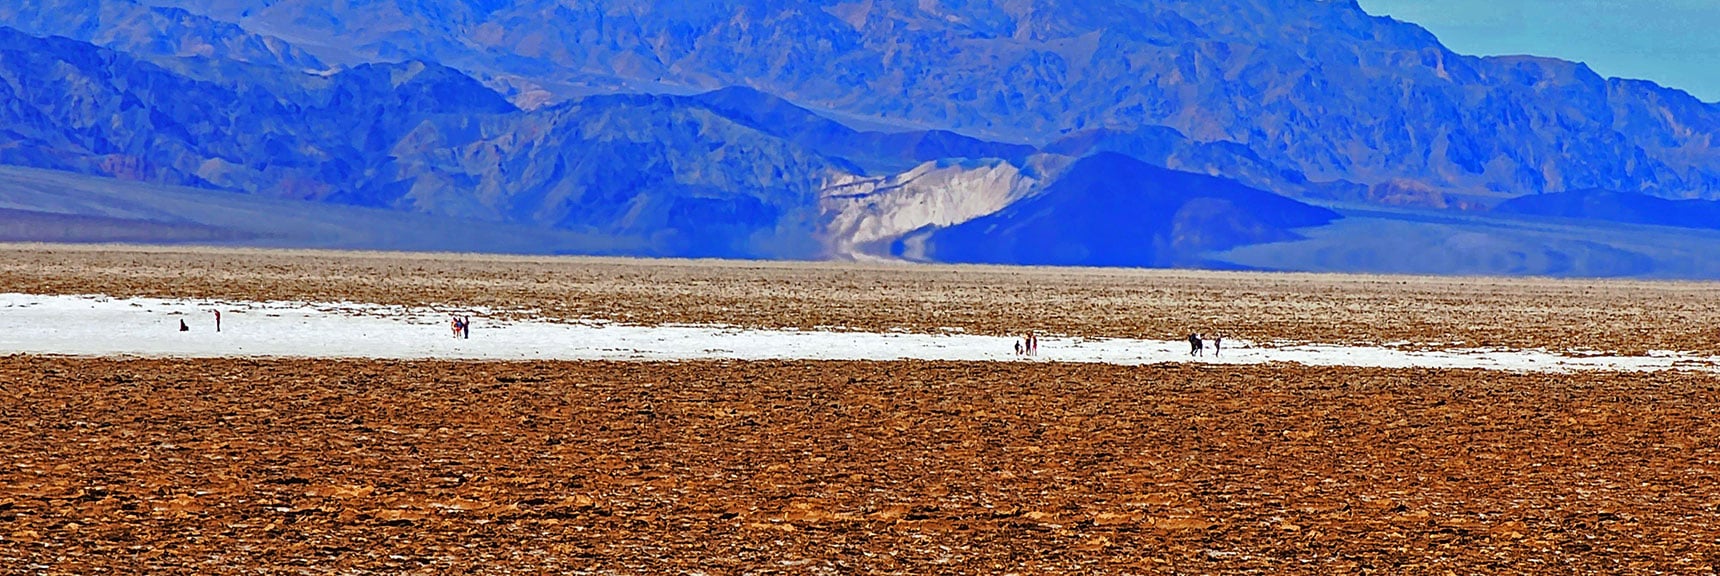 The Badwater Wanderers Usually Get About 1-200 Yards Before Turning Around | Death Valley Crossing | Death Valley National Park, California | David Smith | LasVegasAreaTrails.com